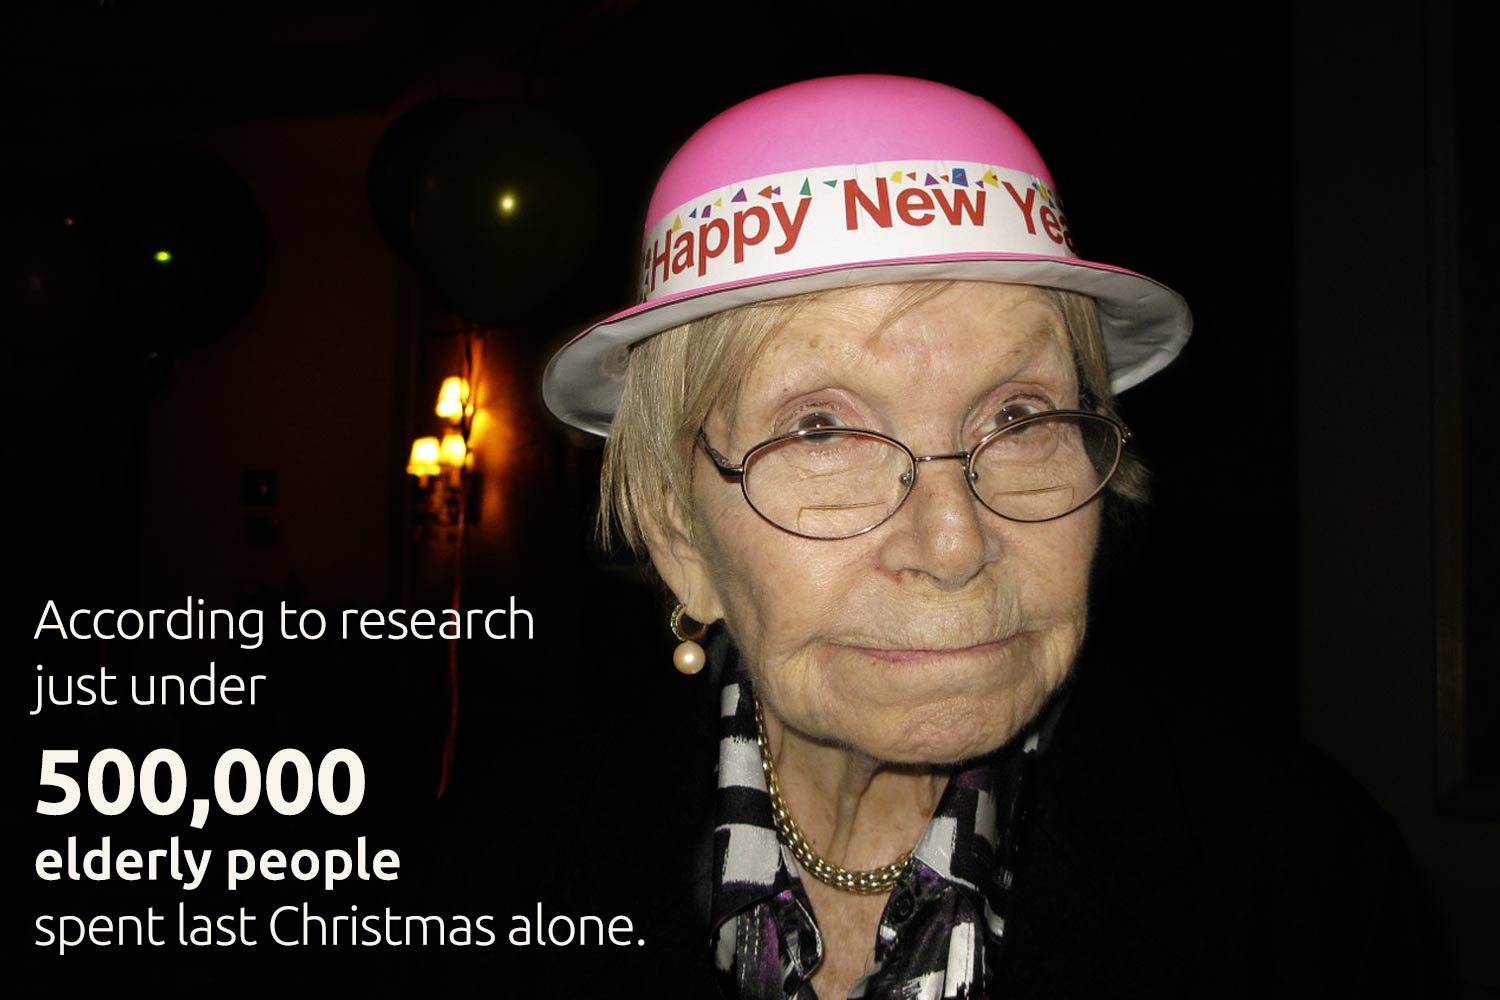 According to research just under 500,000 elderly people spent last Christmas alone.